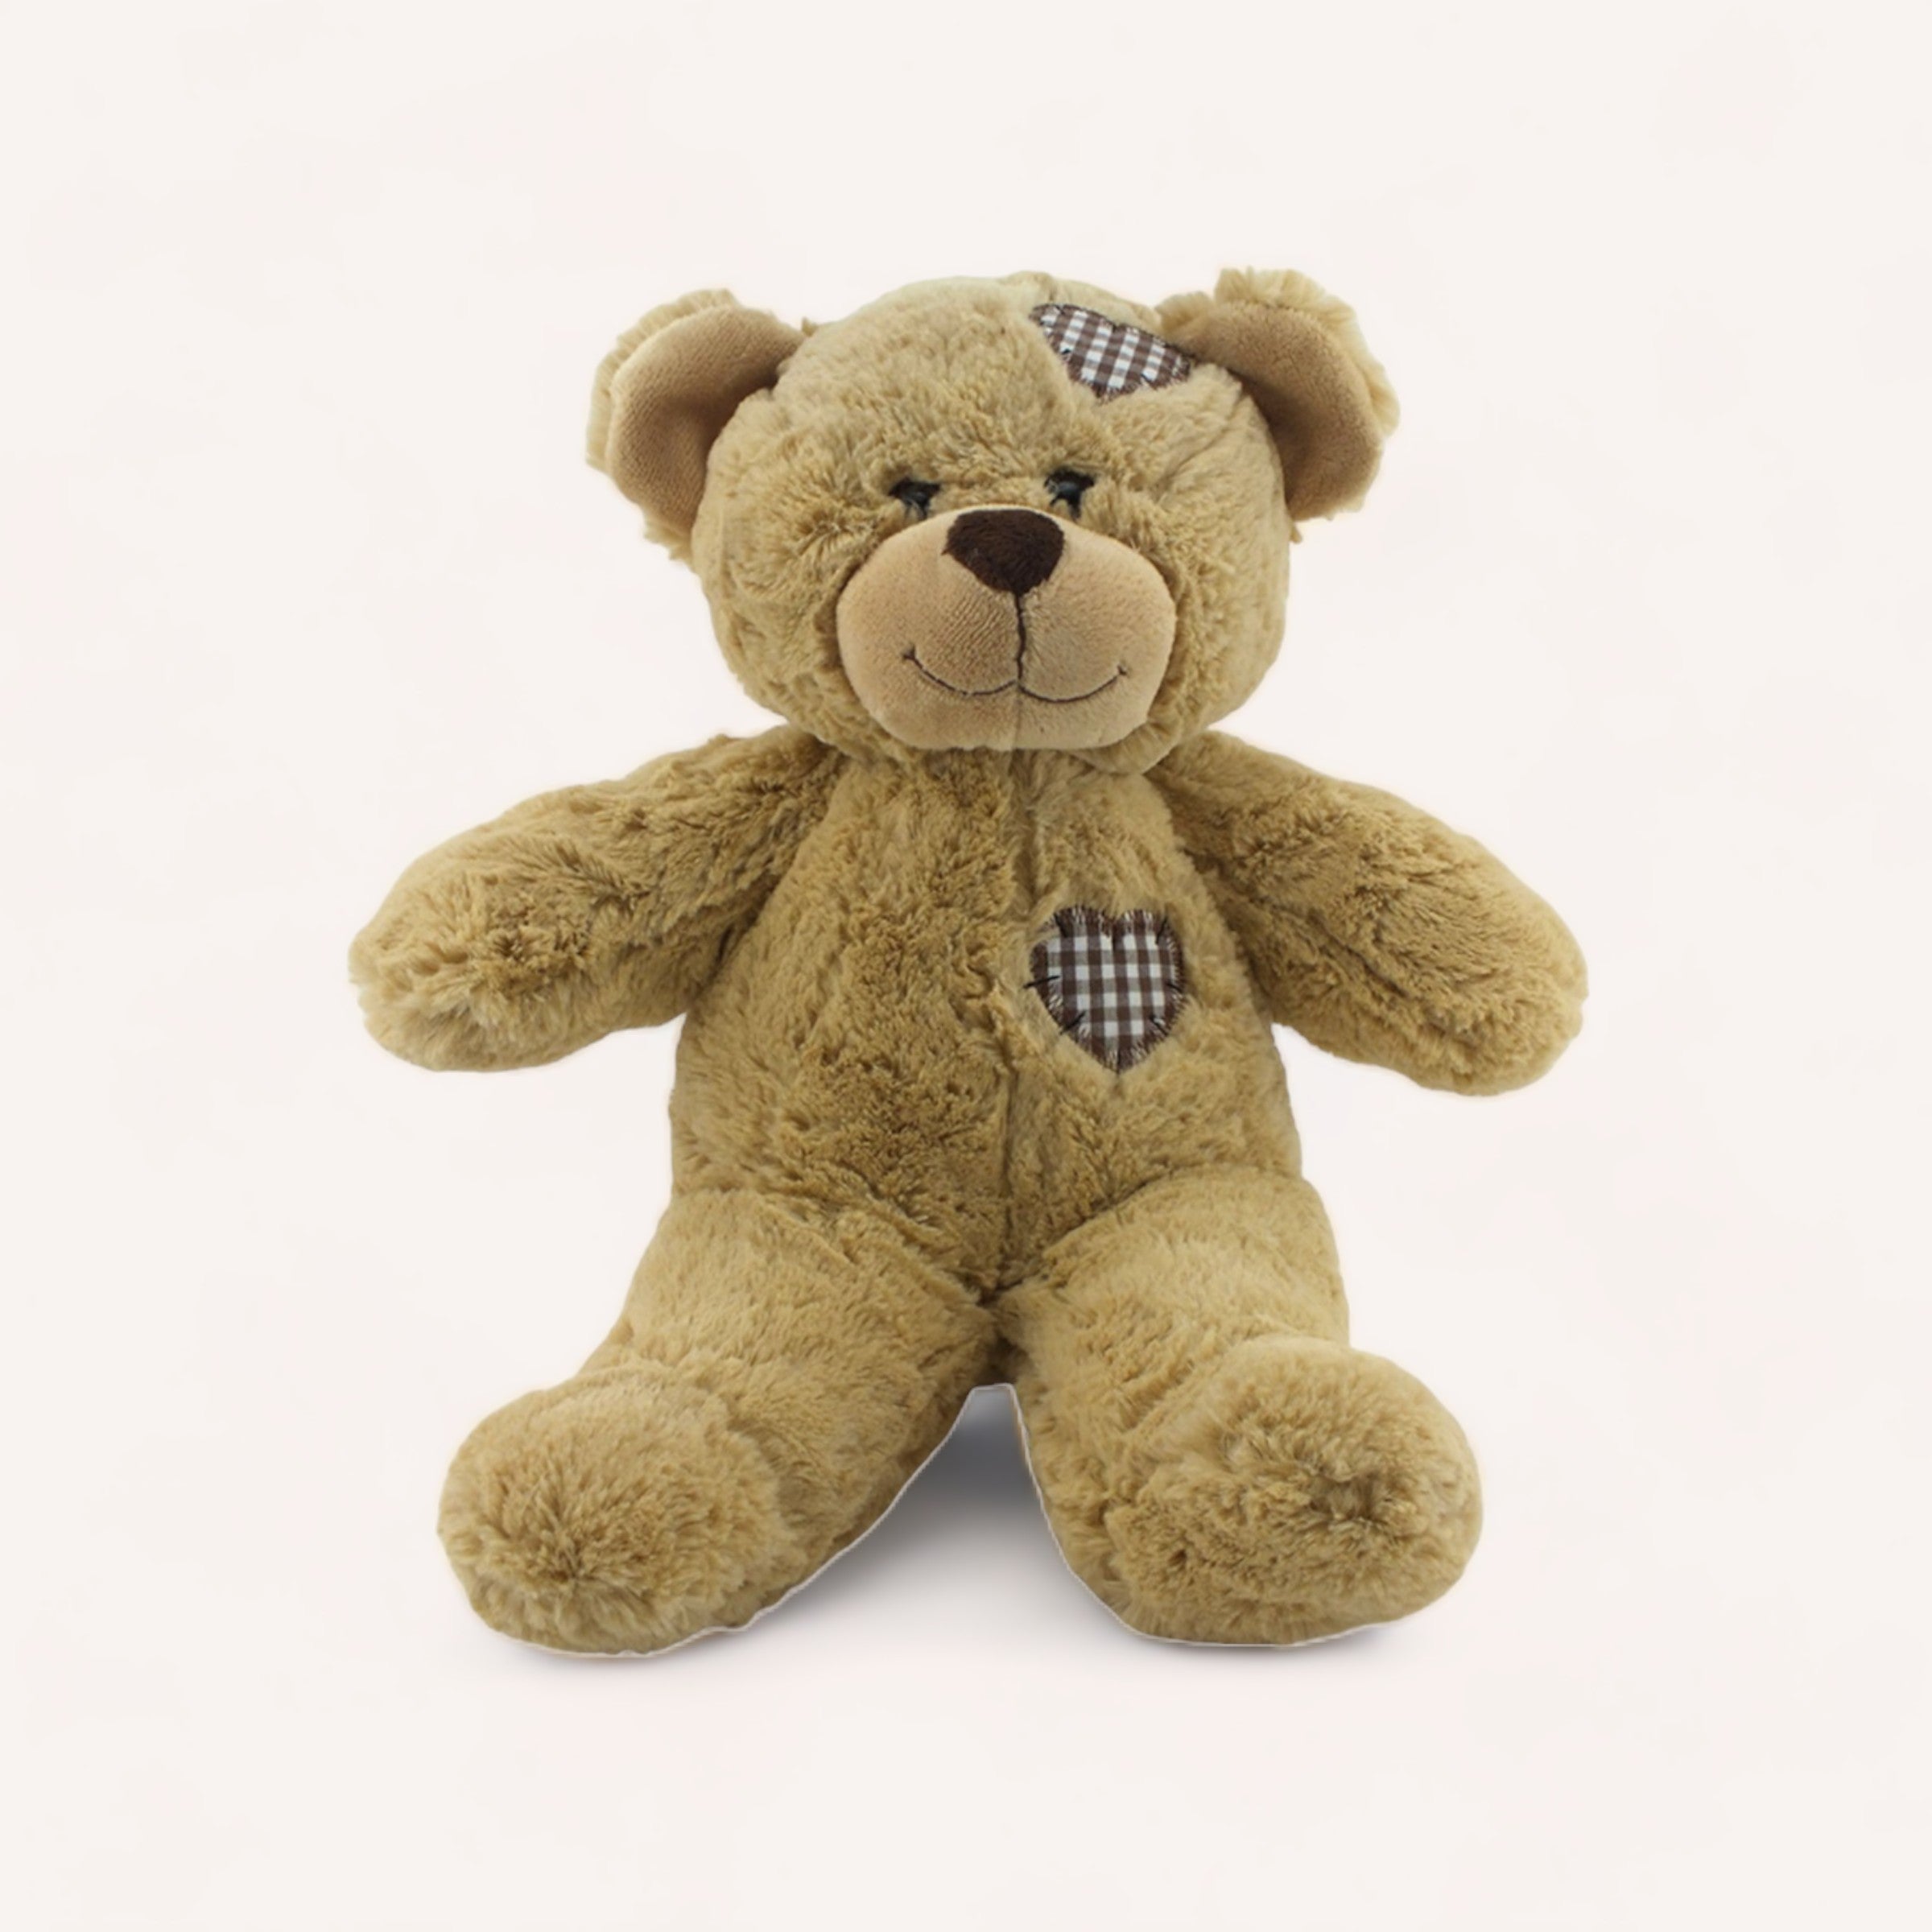 A plush friend with a checkered ear and Brown Patches, sitting against a white background is the Brown Patches Bear by The Teddy Factory.